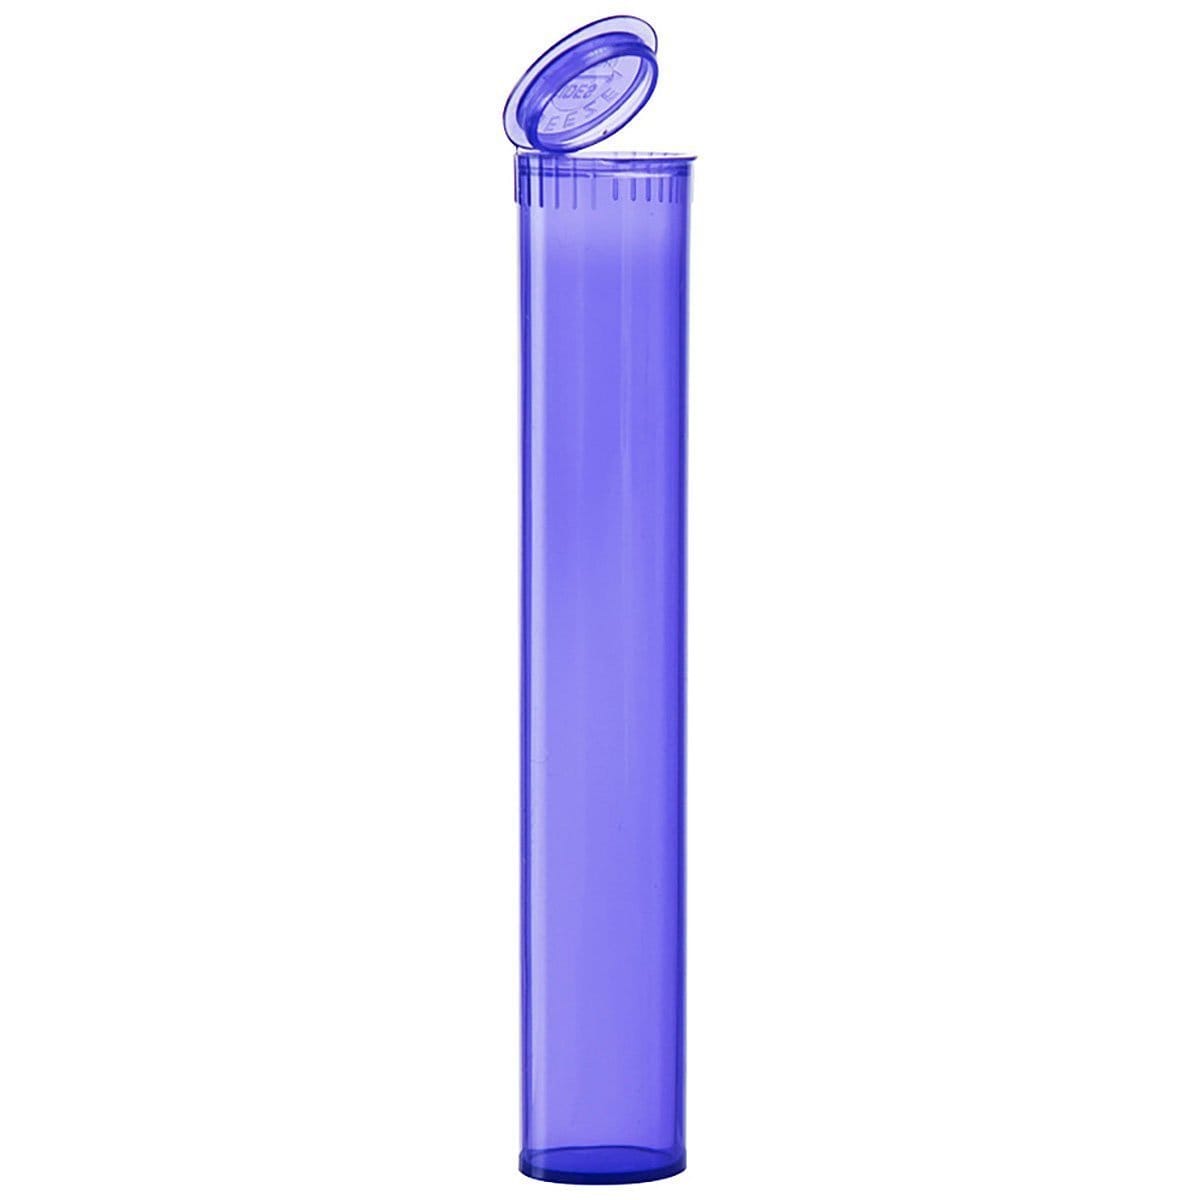 Clearance Translucent Squeeze Top Child-Resistant Pre-Roll Tube | 94 mm Translucent Violet / Box of 1000 (Bulk Pricing)